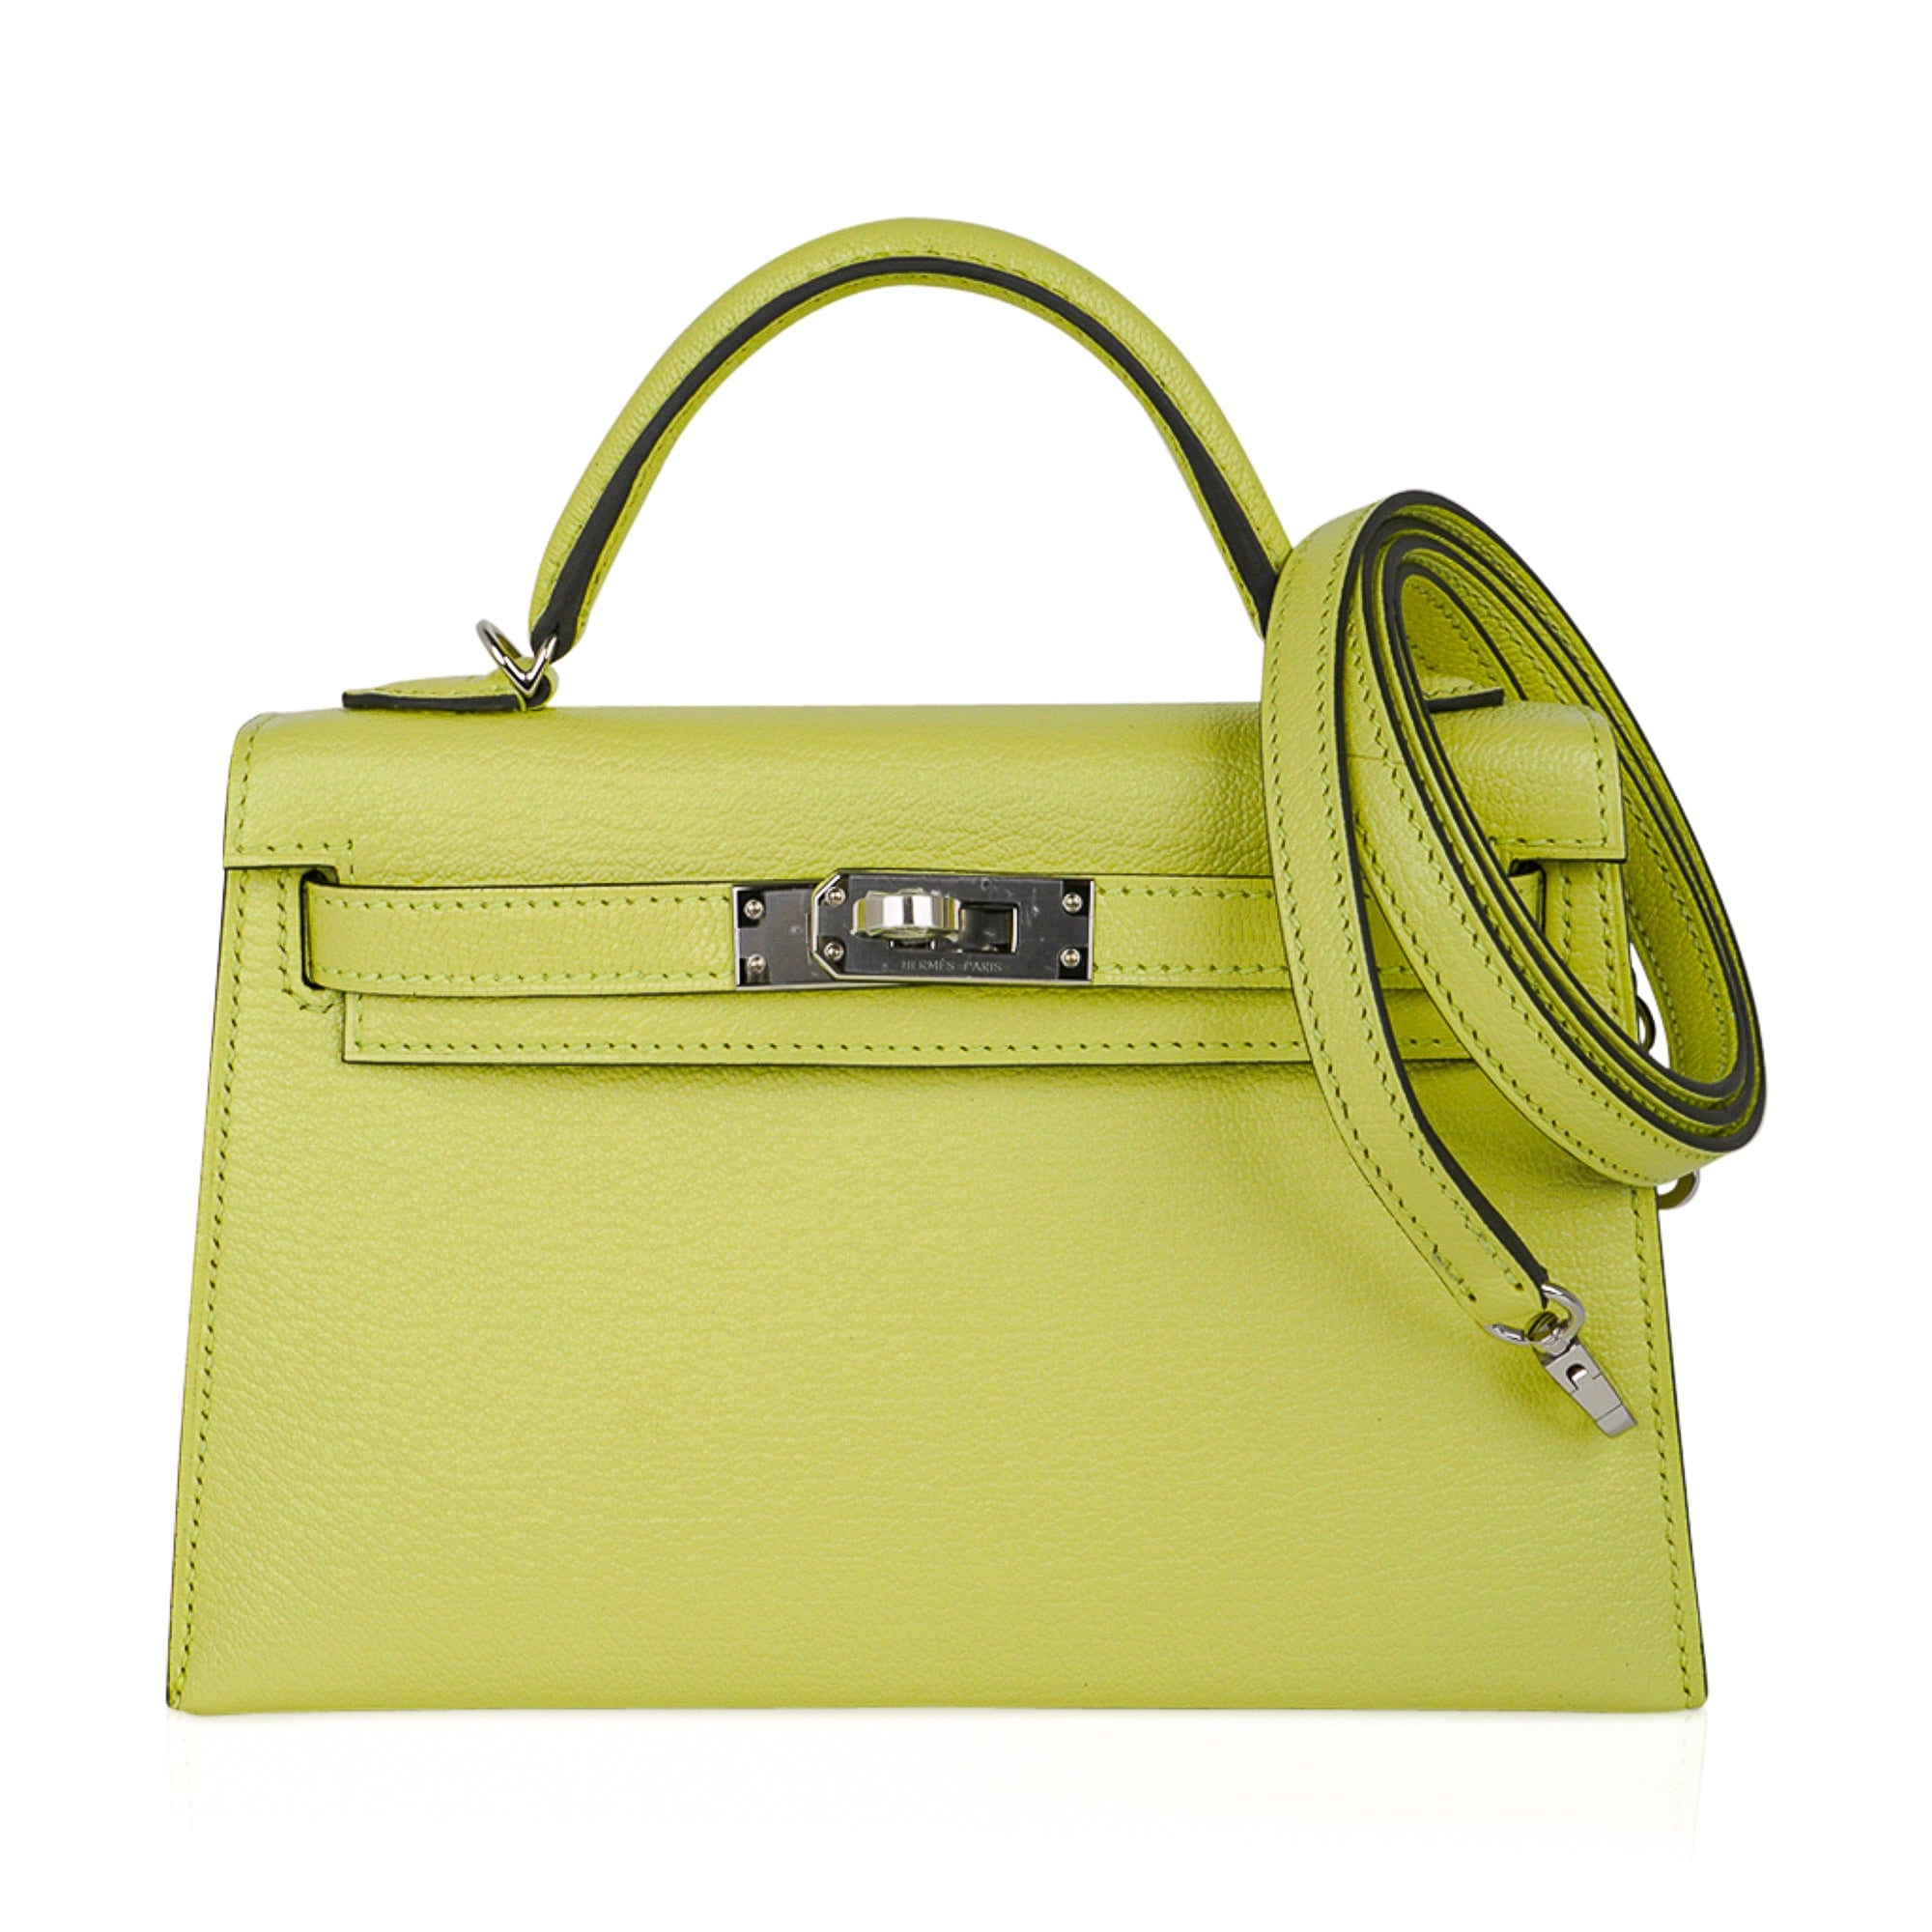 5 WAYS TO TURN THE HERMES KELLY POCHETTE INTO A SHOULDER BAG *game